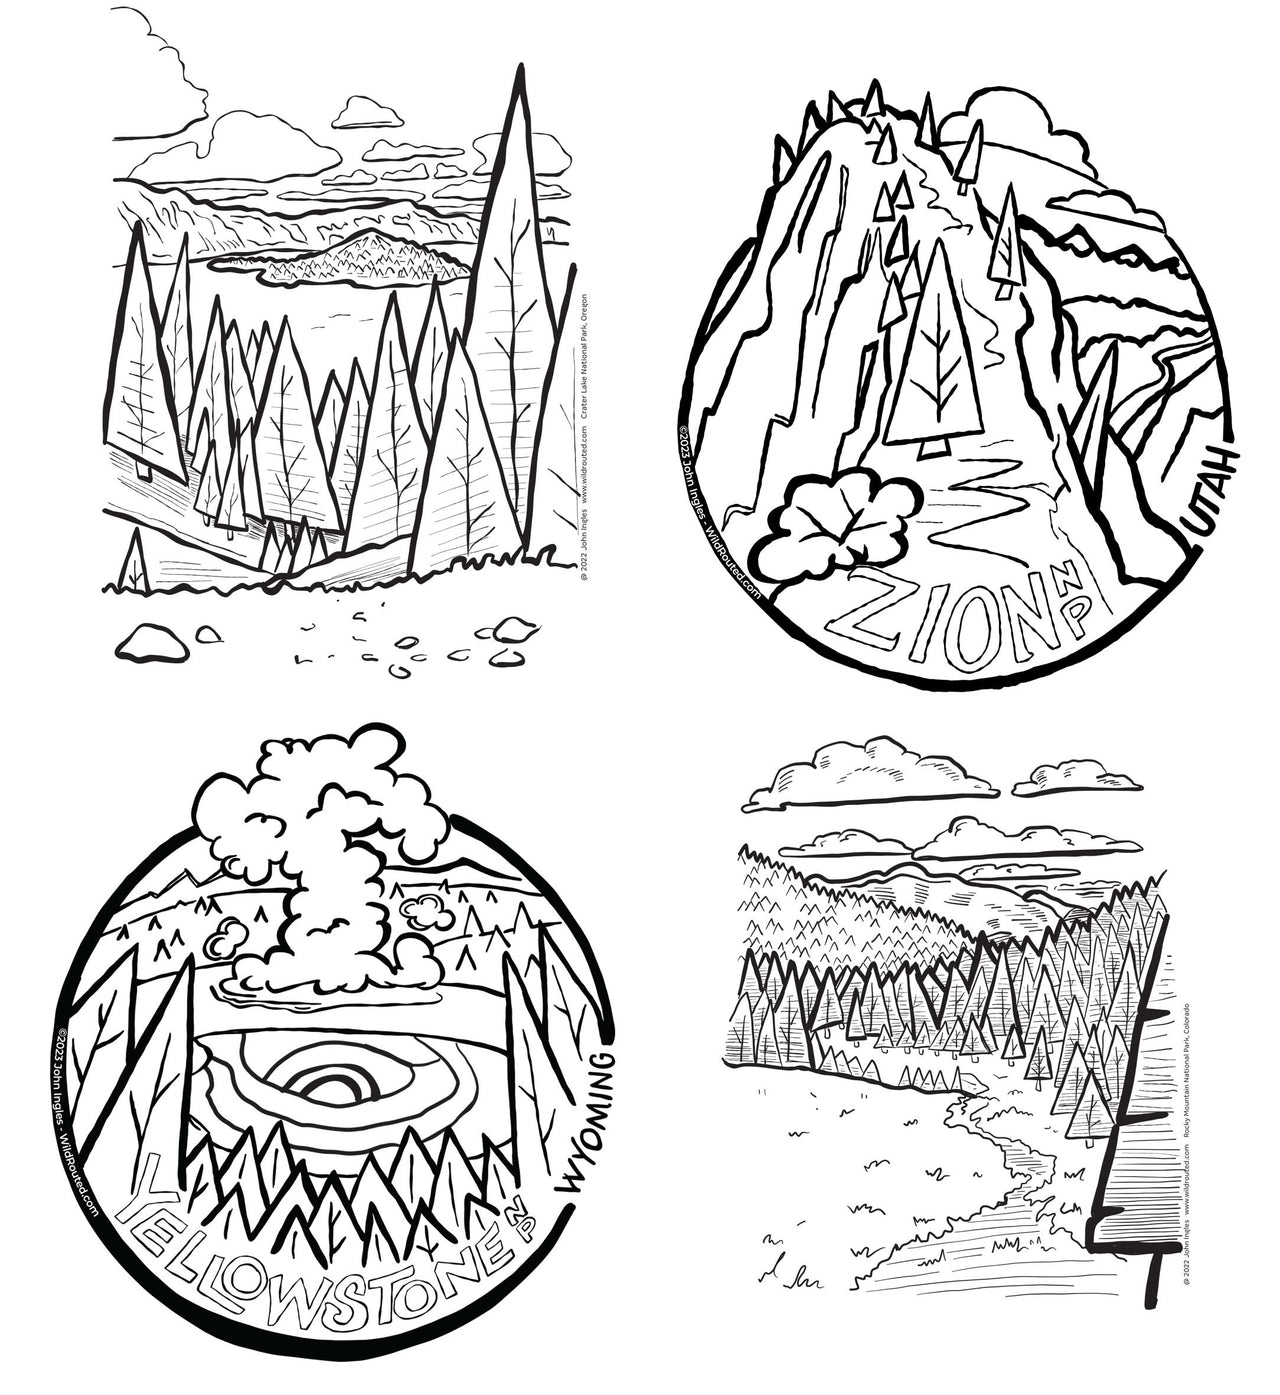 National Parks & Forests Coloring Book Vol. 1